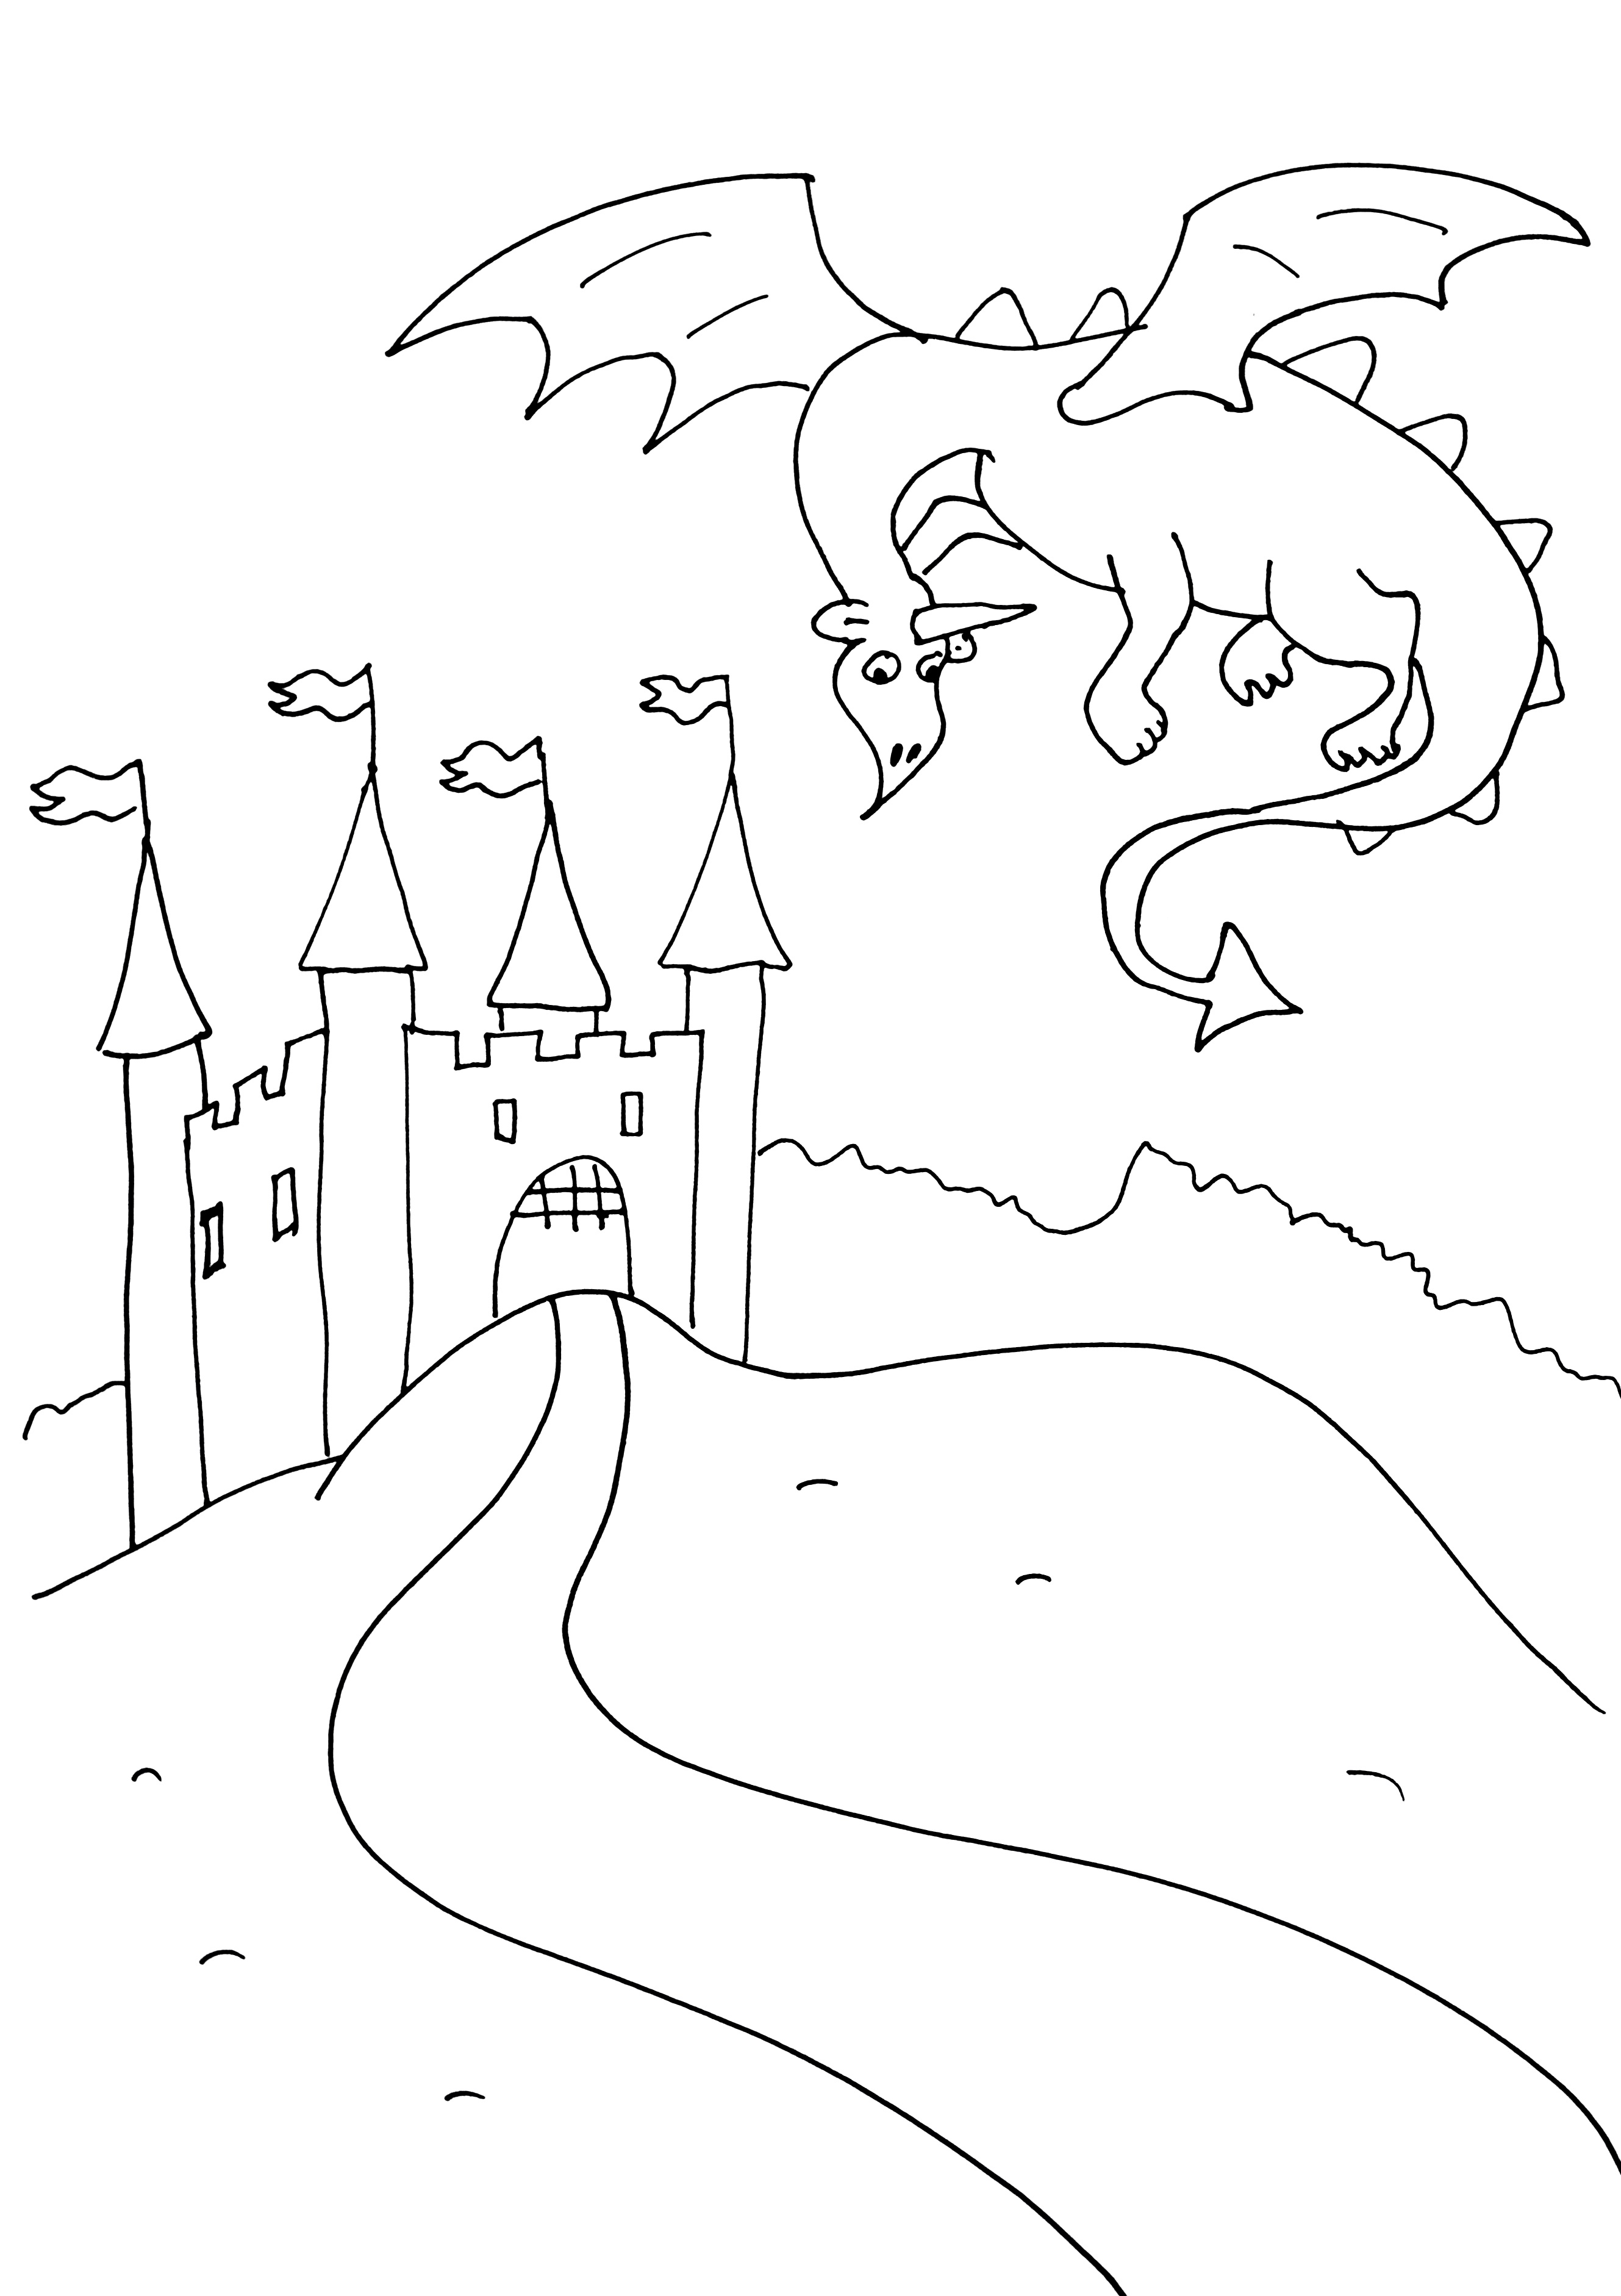 image=chevaliers et dragons coloriage chevaliers dragons 4 1